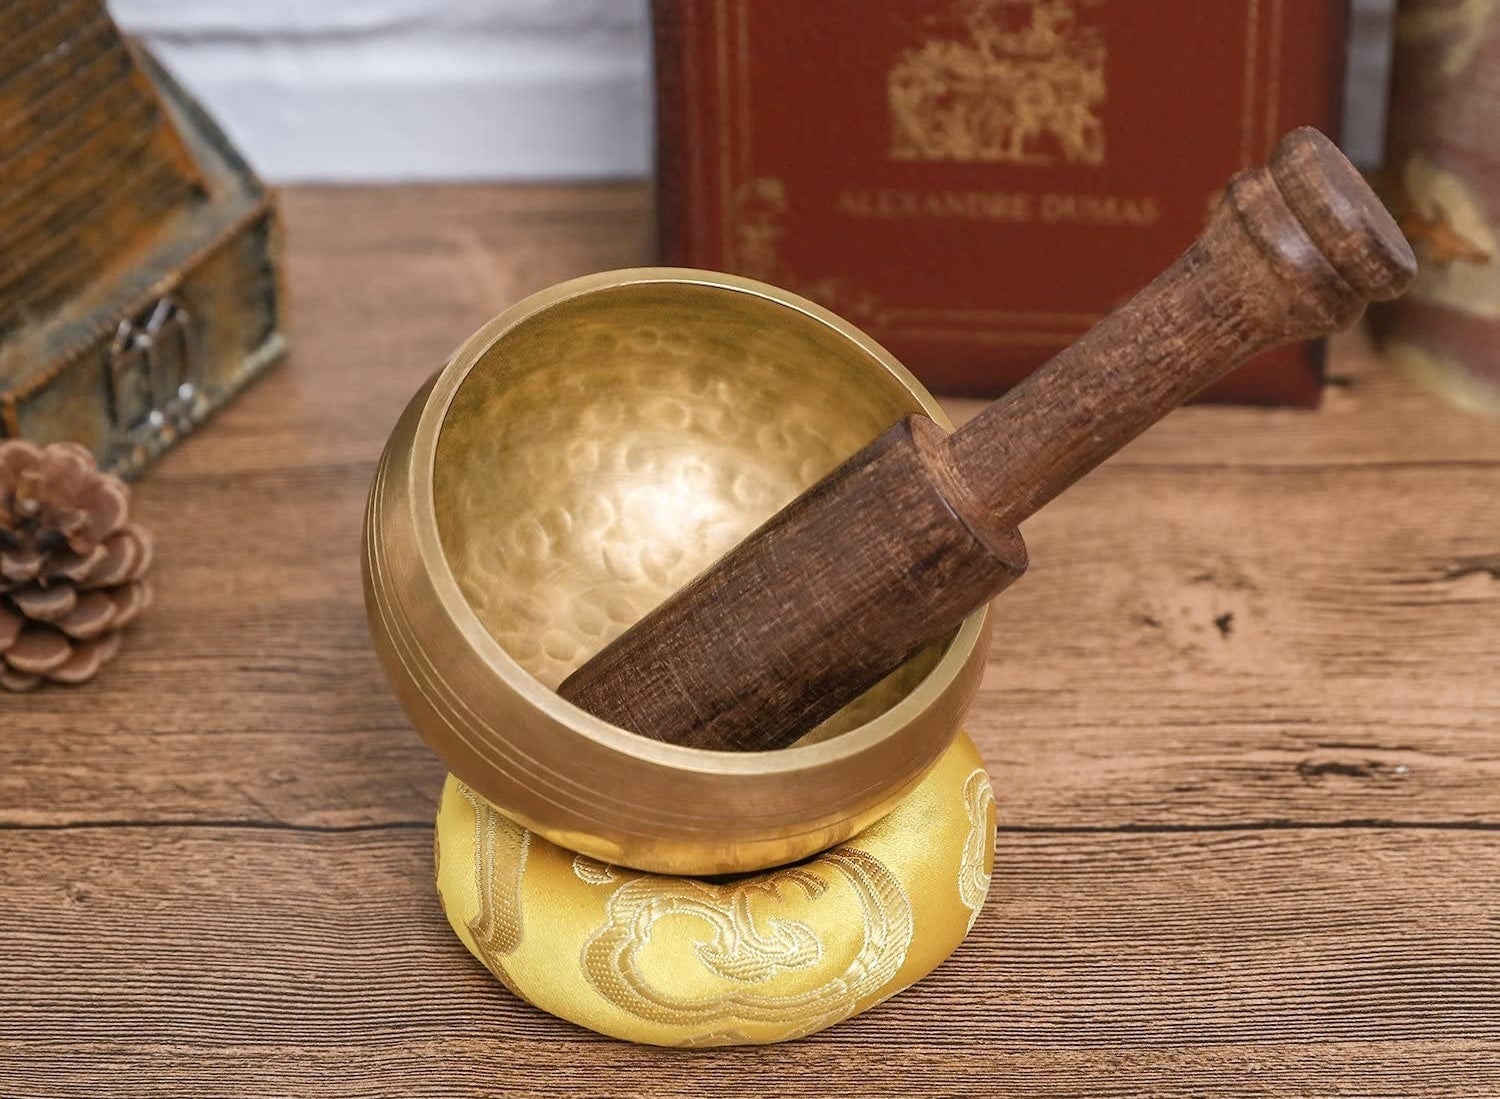 A singing bowl with a wooden striker in it on a cushion on a table